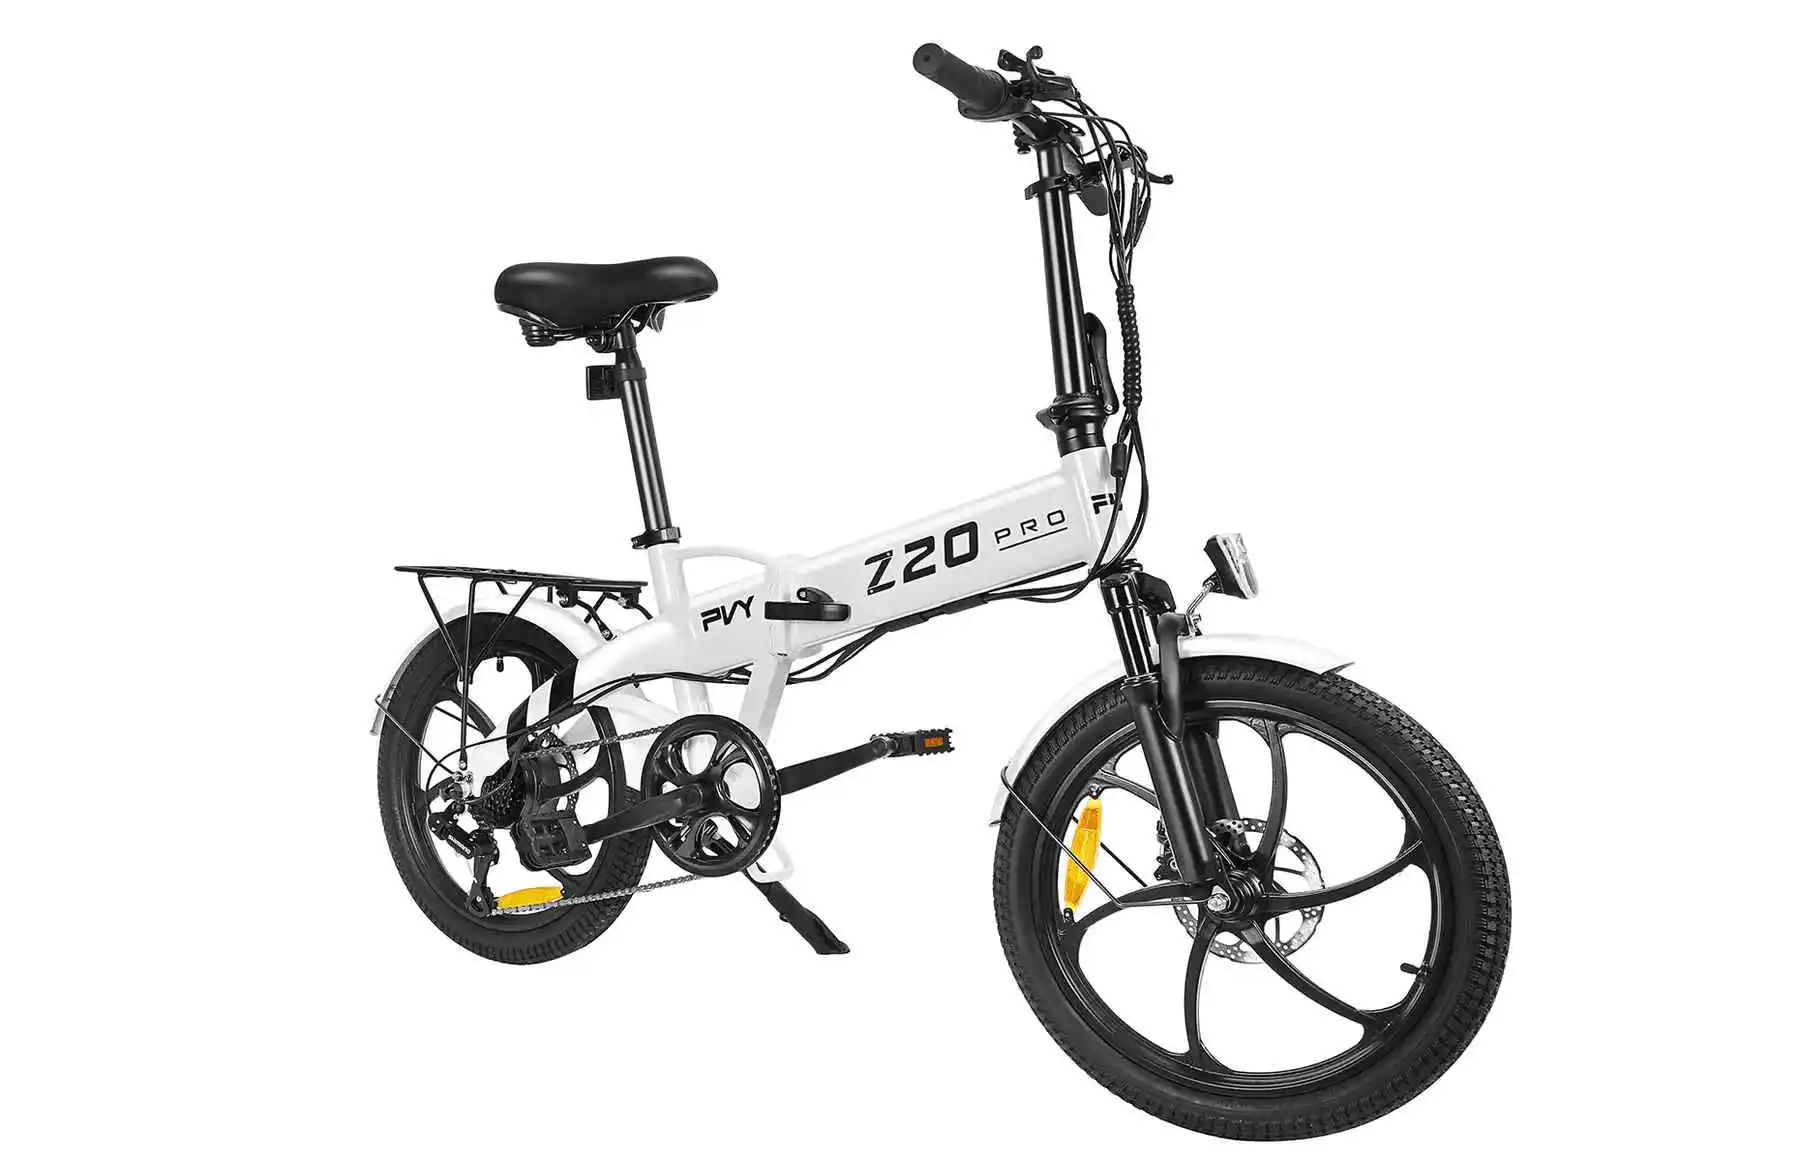 PVY Z20 Pro: Affordable electric folding bike is now available